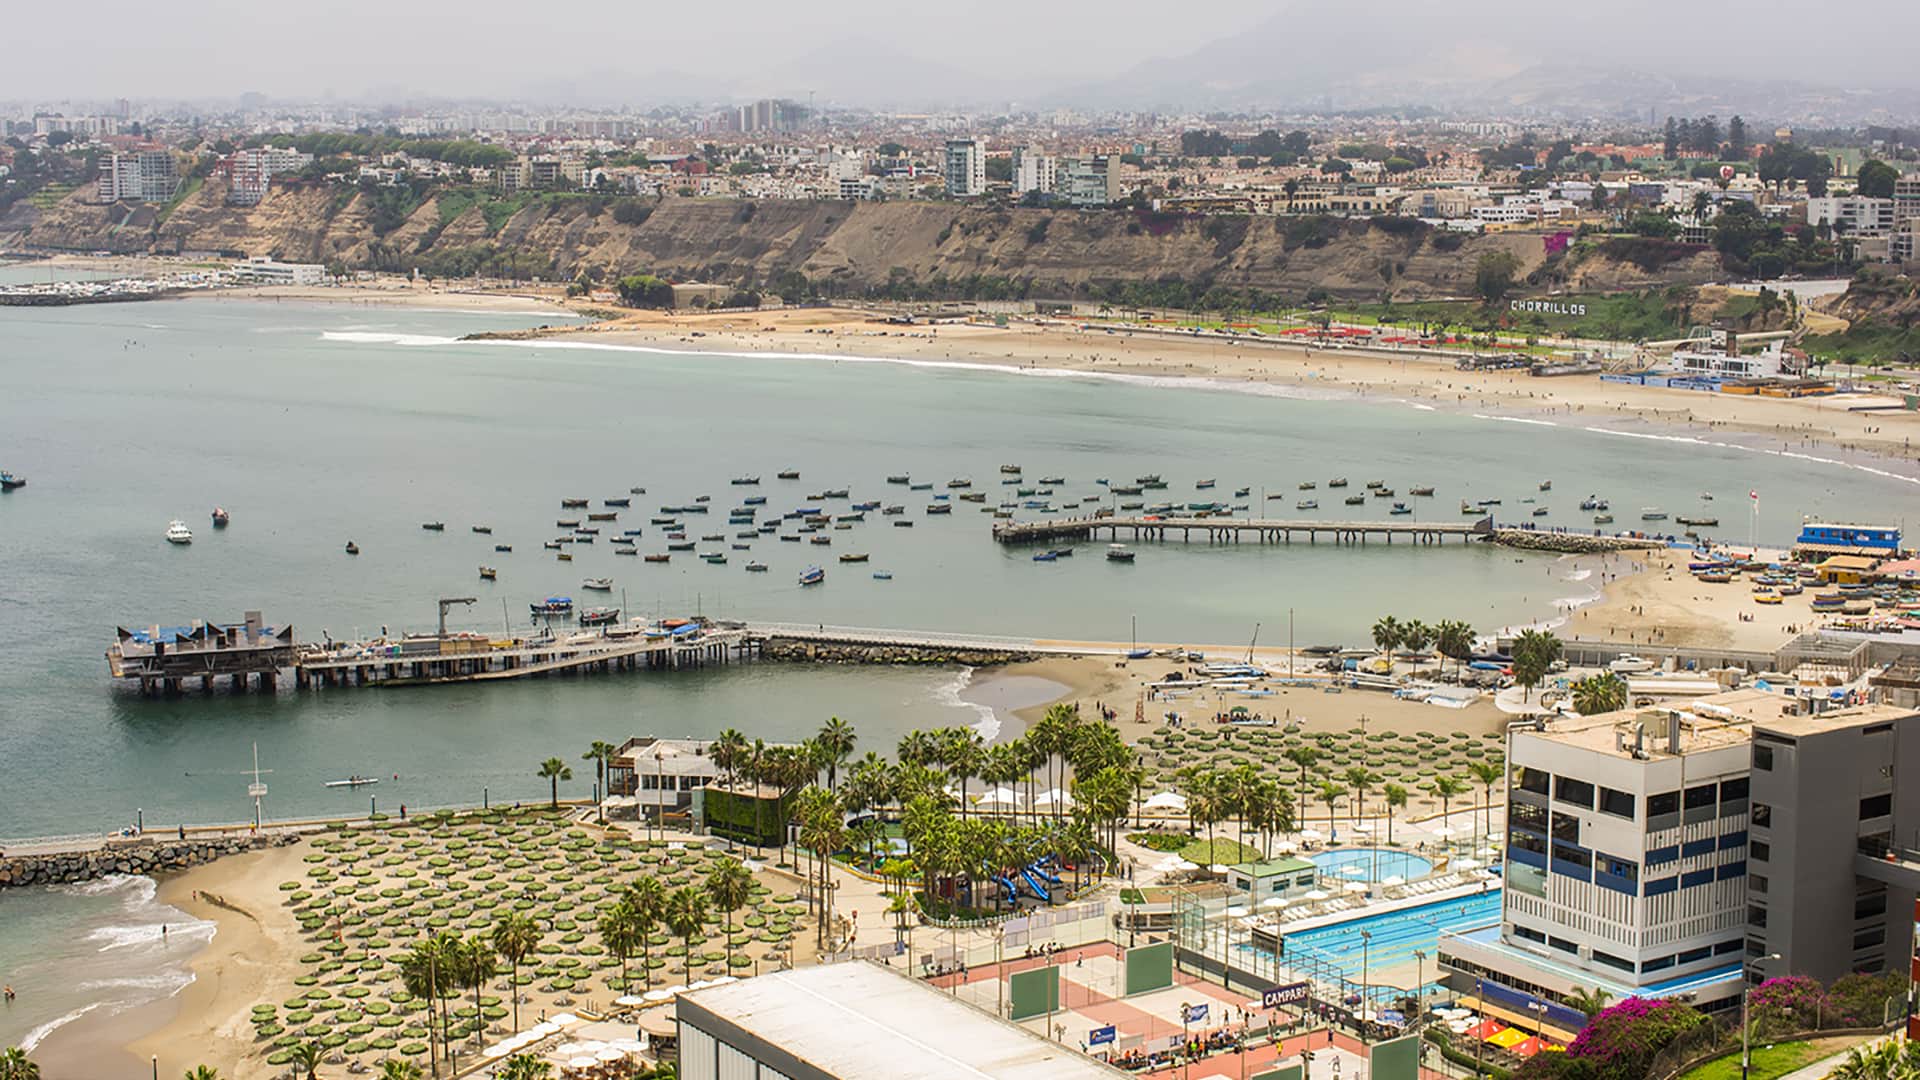 11View of the beautiful bay of Barrancos and Chorrillos where you can see fishermen's boats and the artisanal dock | Responsible Travel Peru